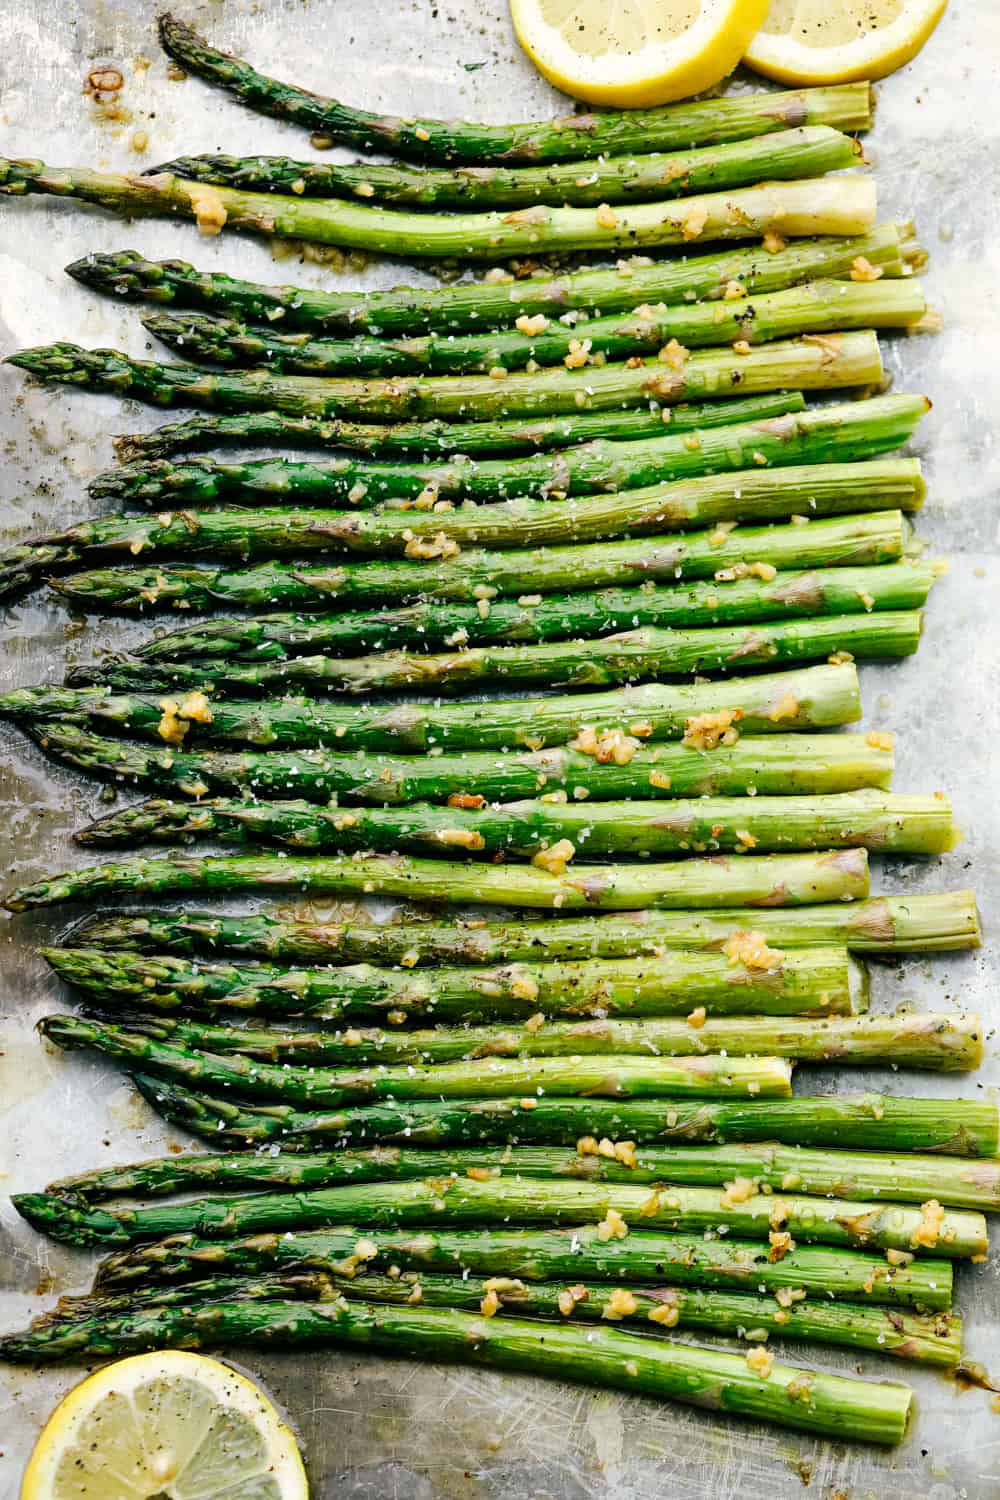 Asparagus all lined up flat on the baking sheet with lemons garnished around them. 